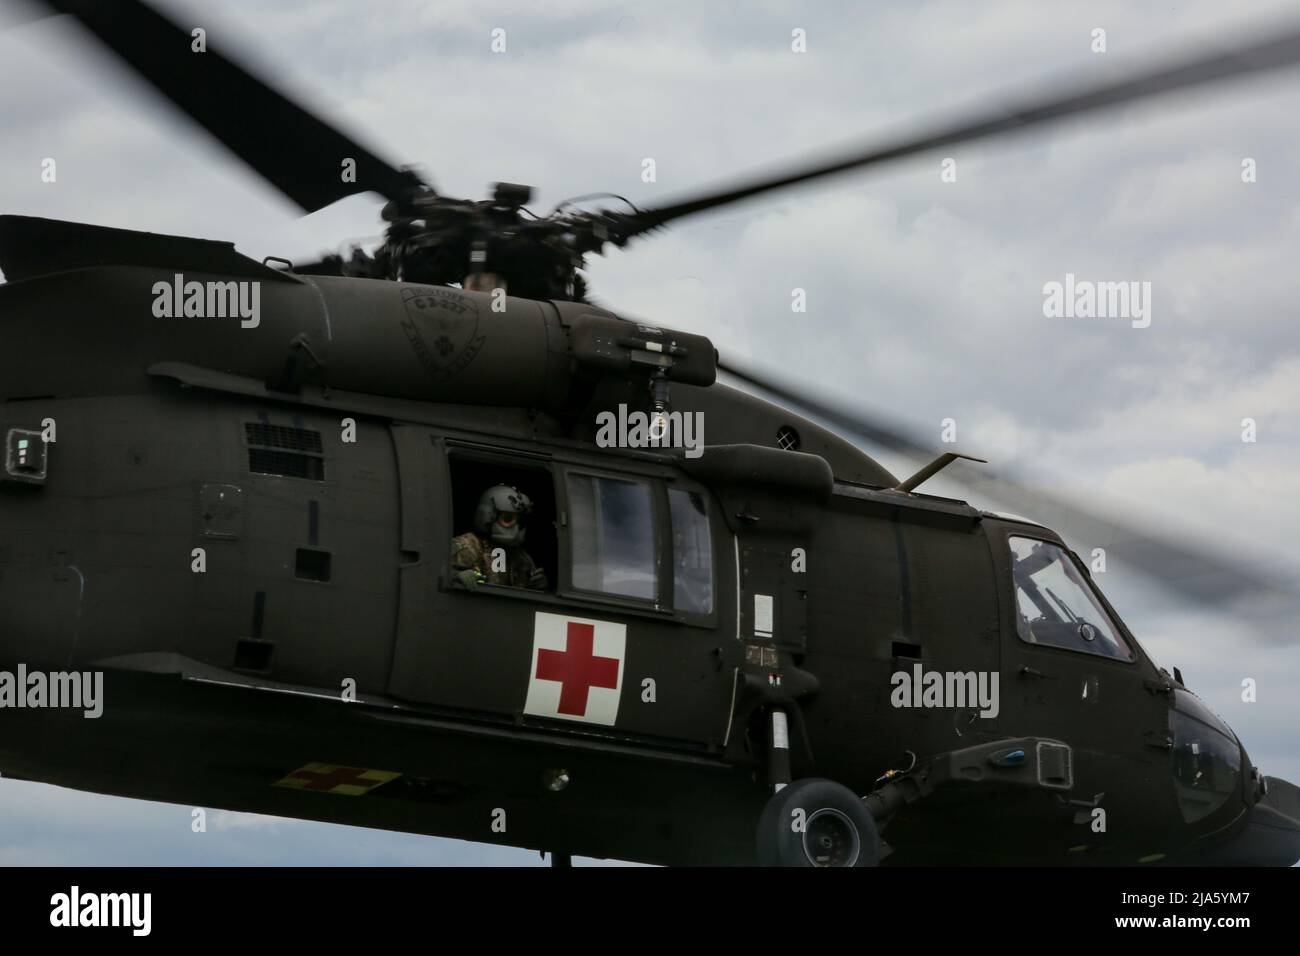 U.S. Soldiers conduct medical evacuation training in a MH-60 Blackhawk during Exercise Combined Resolve 17 (CbR 17) at Hohenfels Training Area, Joint Multinational Readiness Center (JMRC) in Hohenfels, Germany, May 26, 2022. CbR 17 is a United States Army Europe-Africa directed, 7th Army Training Command executed exercise that takes place at JMRC from May 20 to June 19, 2022. The event is designed to evaluate and assess a unit's ability to conduct operations in a complex, multi-domain simulated battle space. The focus of the rotation is to exercise combined arms operations in a multinational e Stock Photo